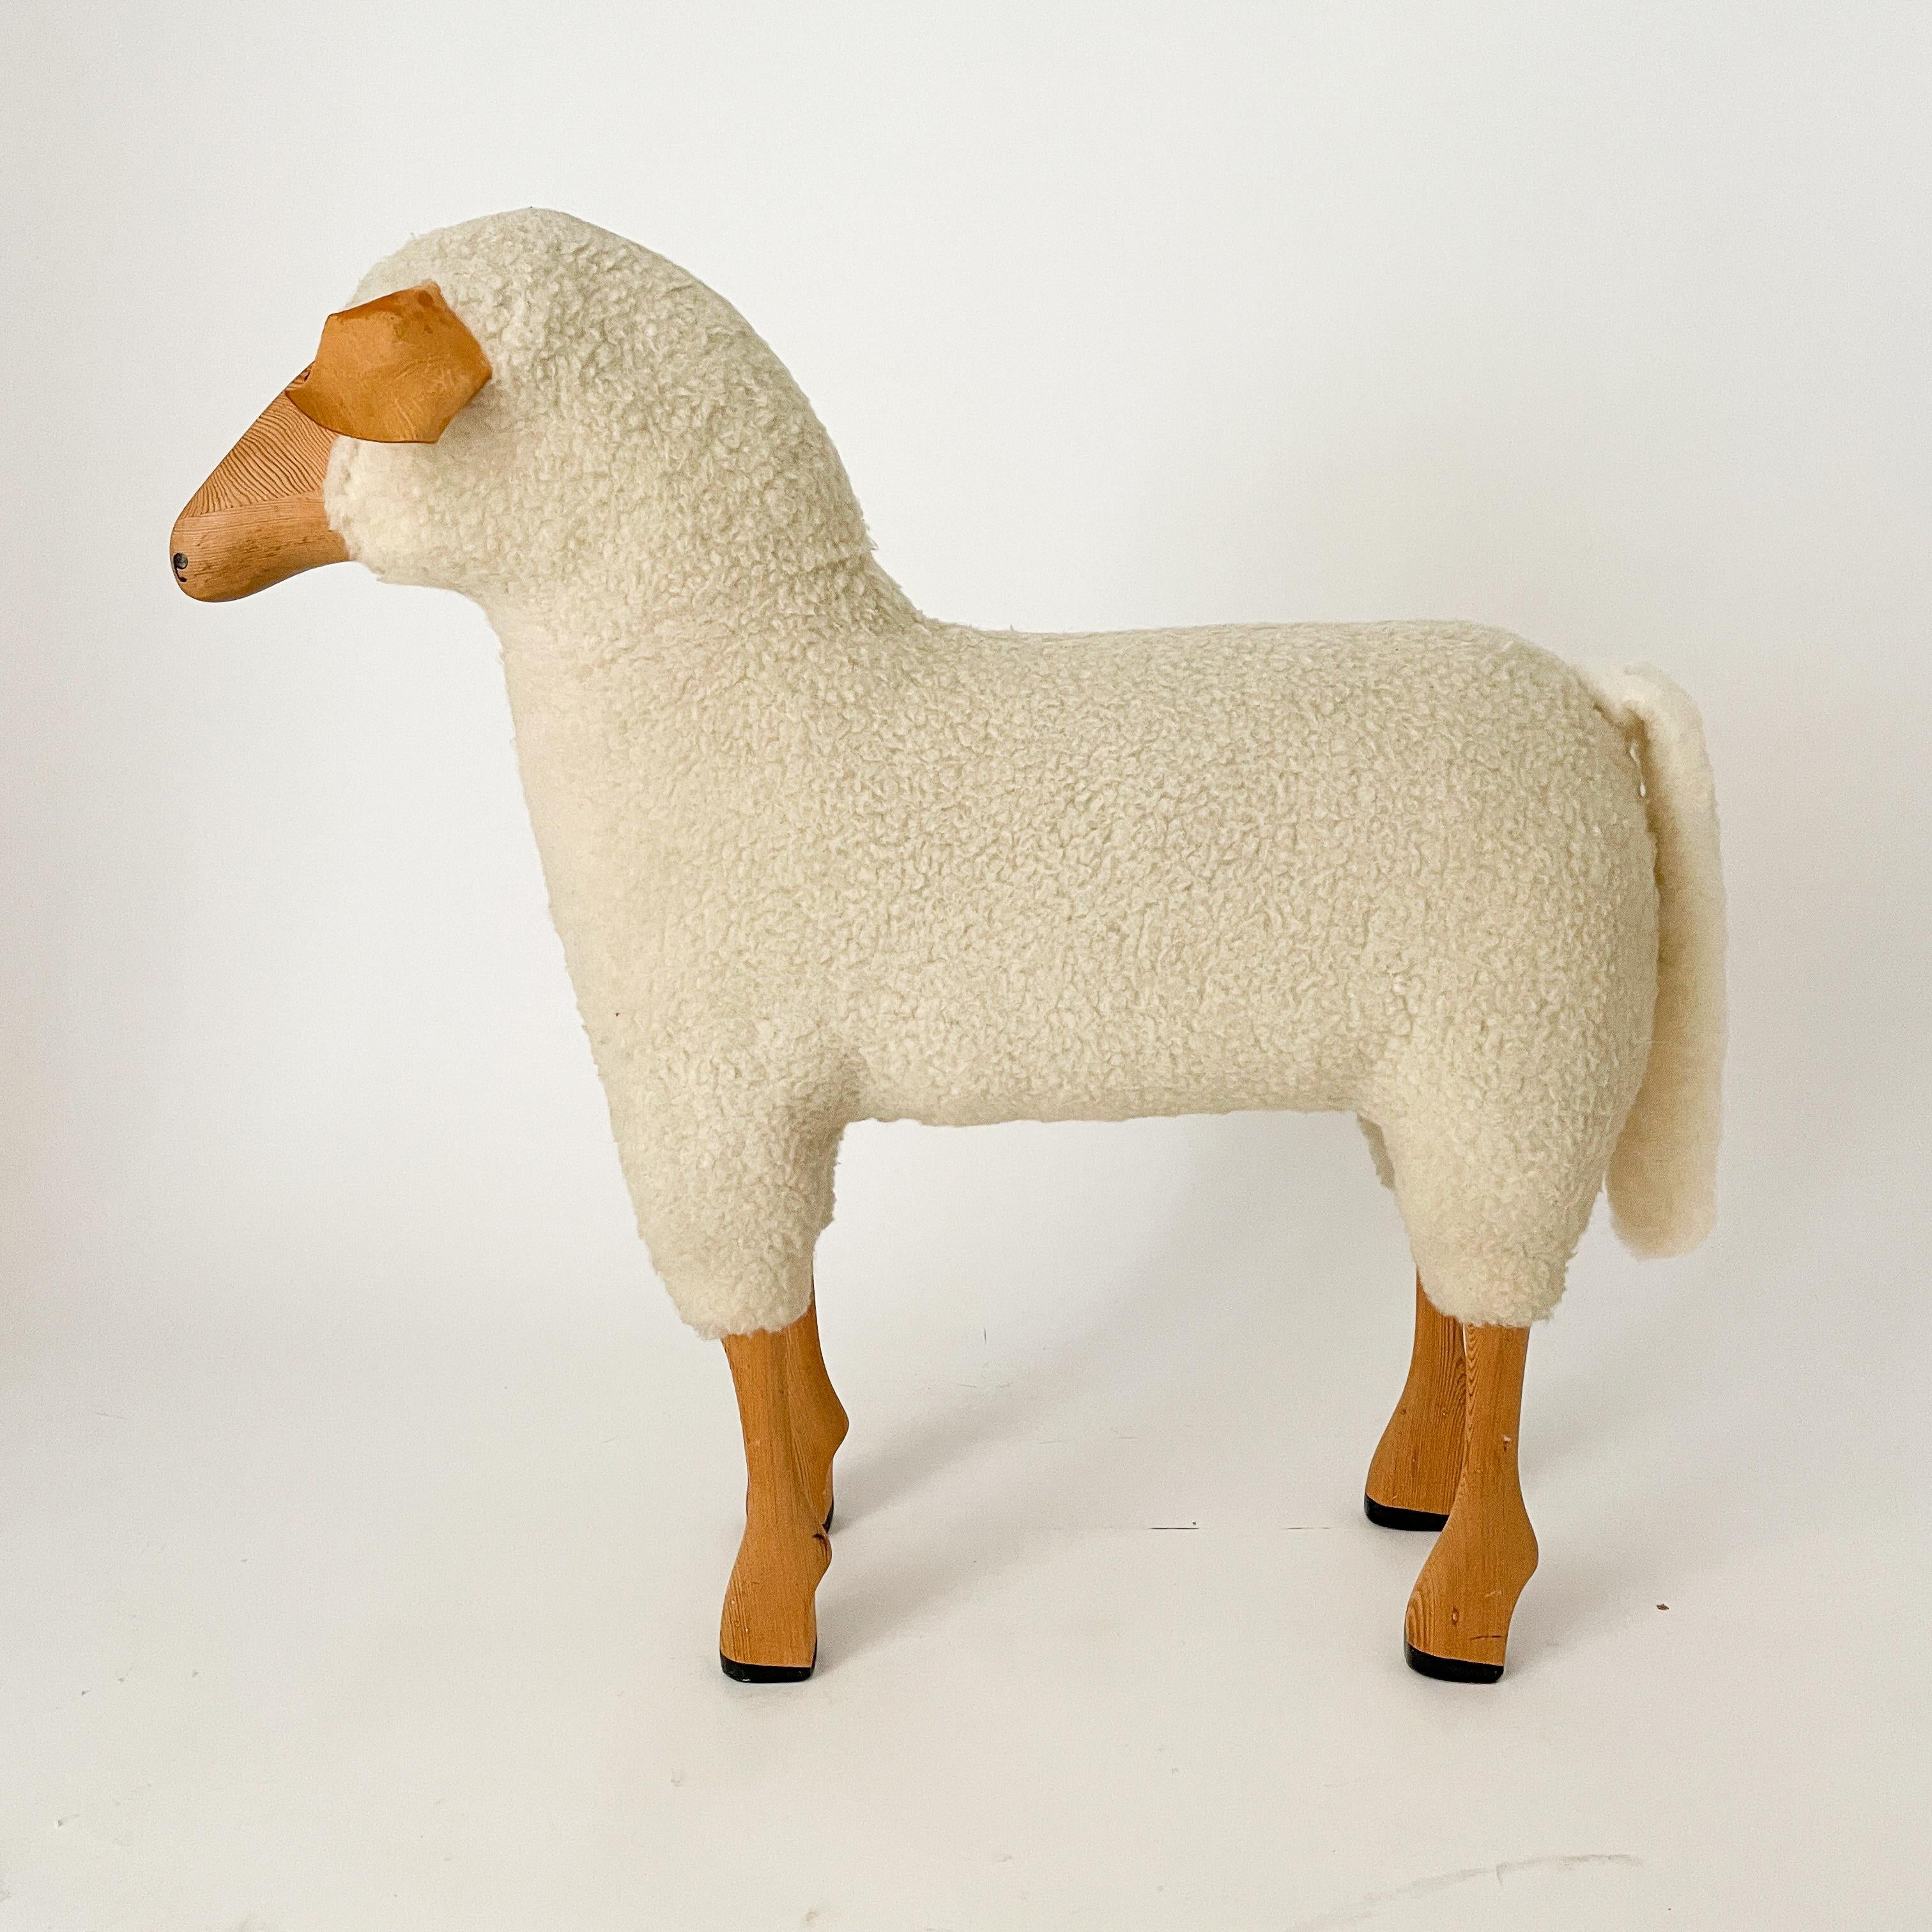 Designed by Hanns-Peter Krafft for Meier. This sheep is a playful interpretation of a stool, but also acts as a sculptural accent. Handmade in Germany, this piece has a beautiful patina throughout; wood has darkened beautifully, leather shows just